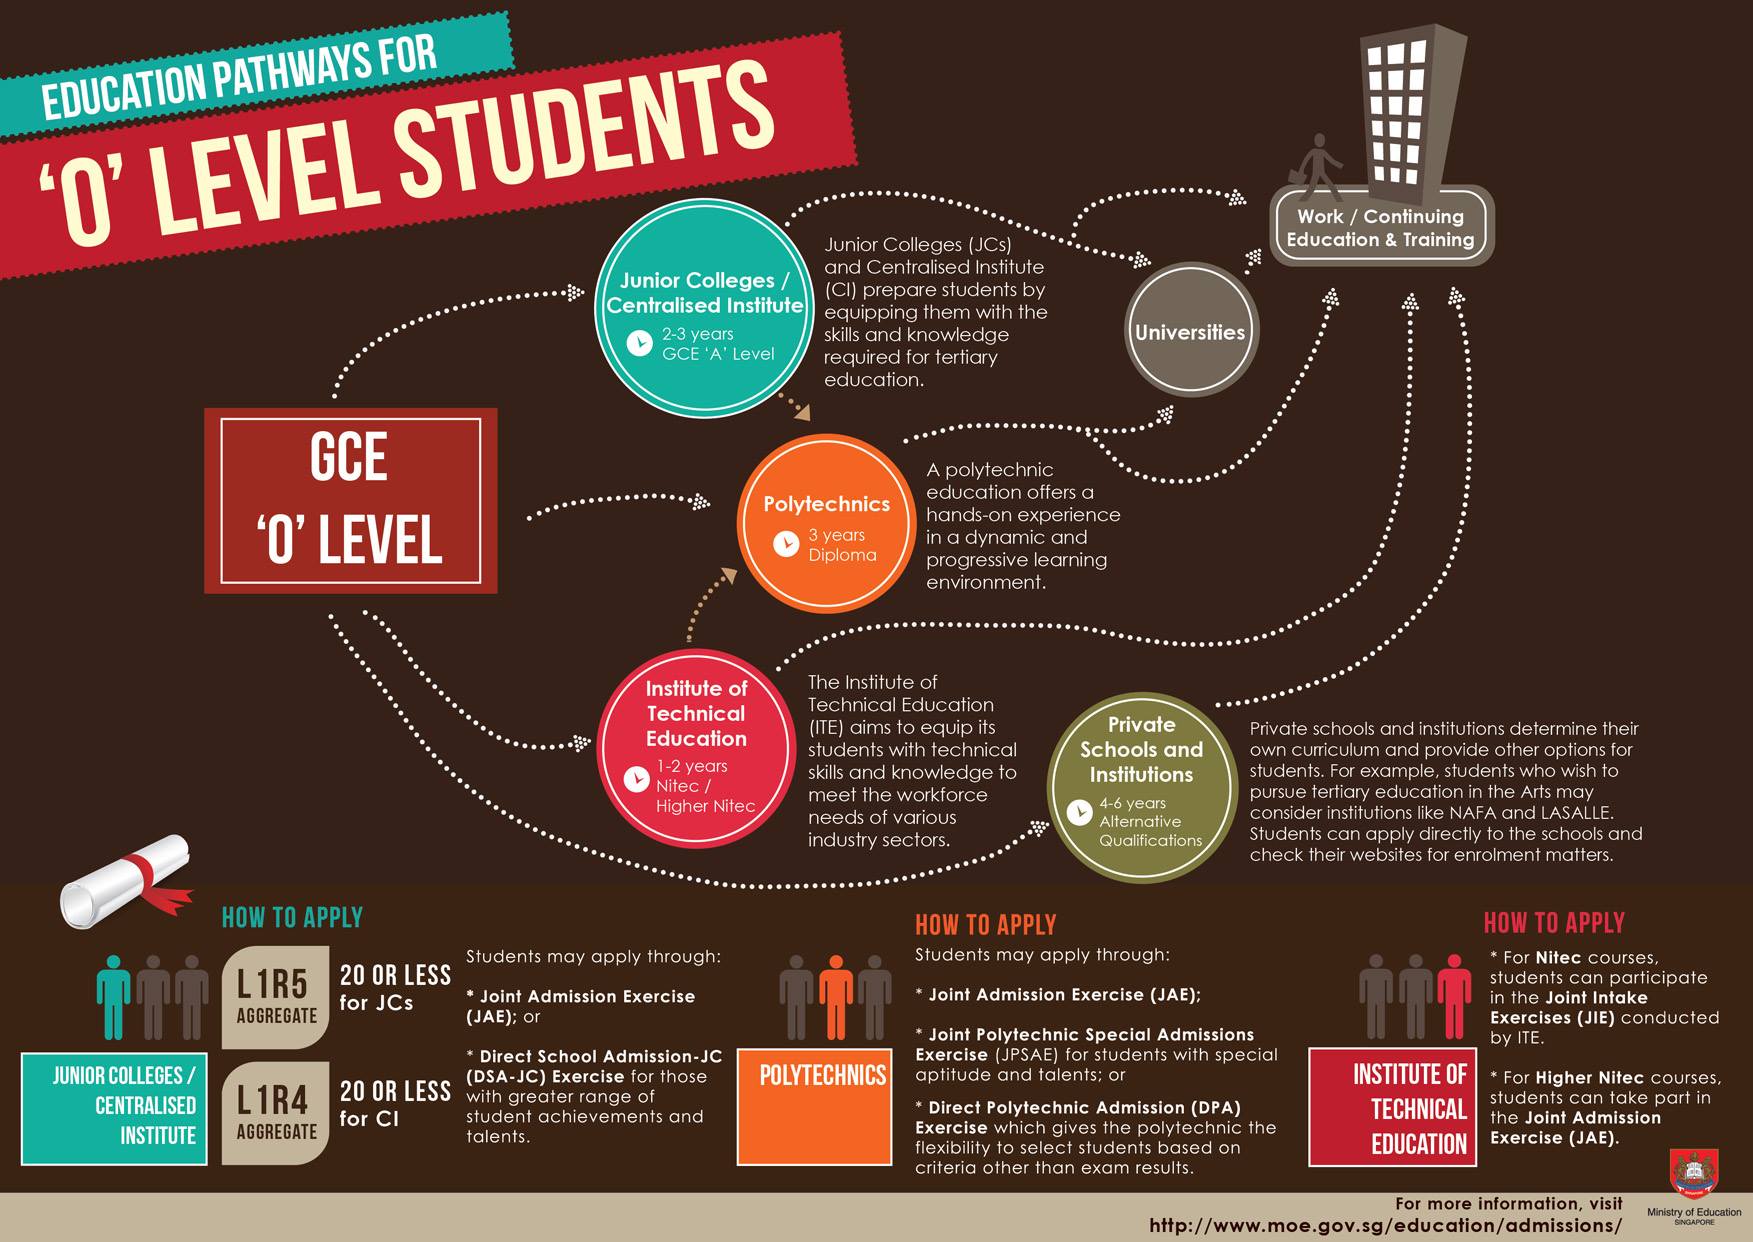 Education Pathways for 'O' Level Students